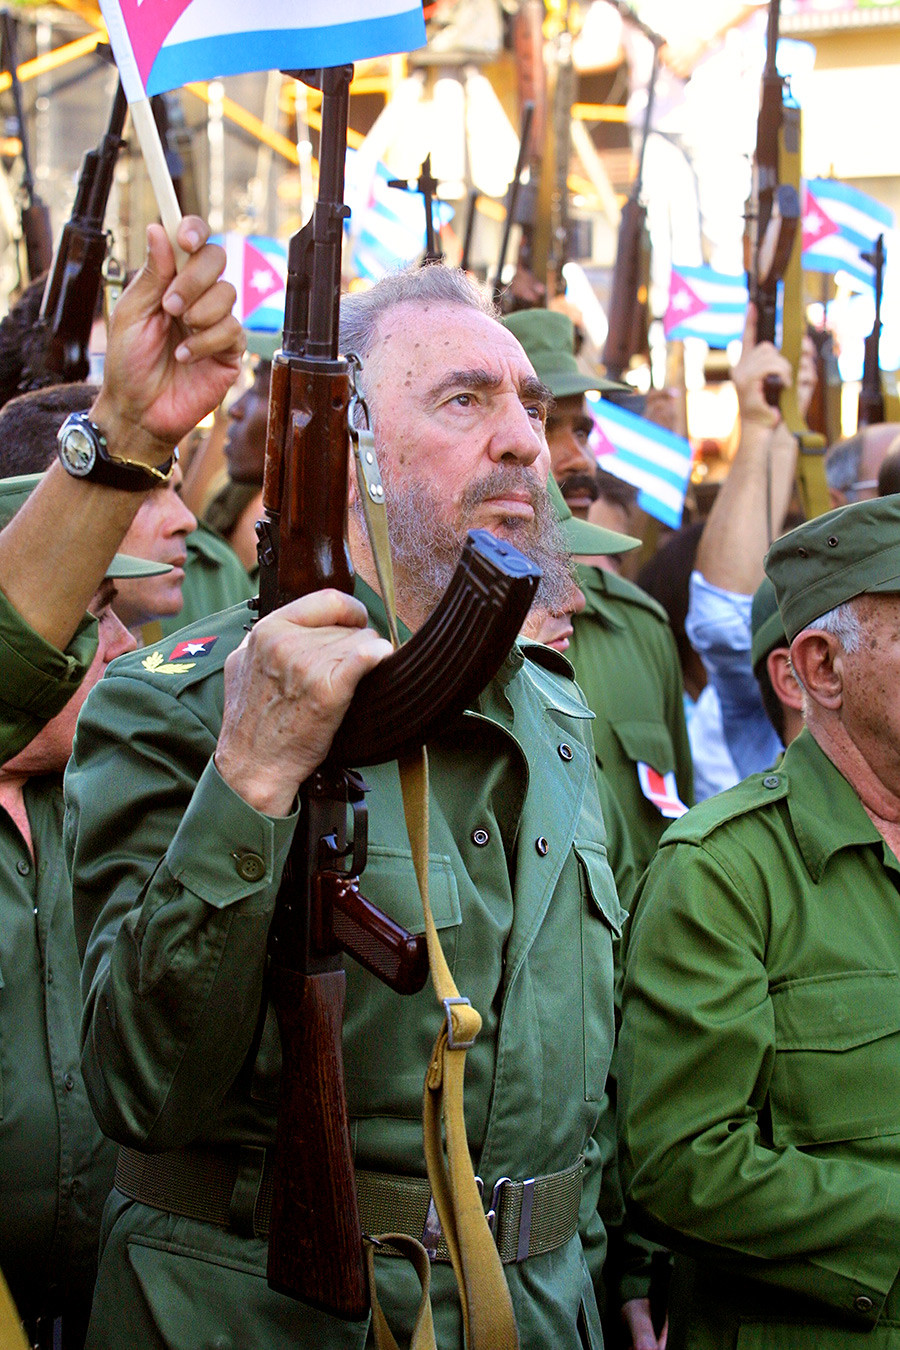 Cuban president Fidel Castro wielding an AK as a symbol of revolution during an annual revolution anniversary in 2001. 